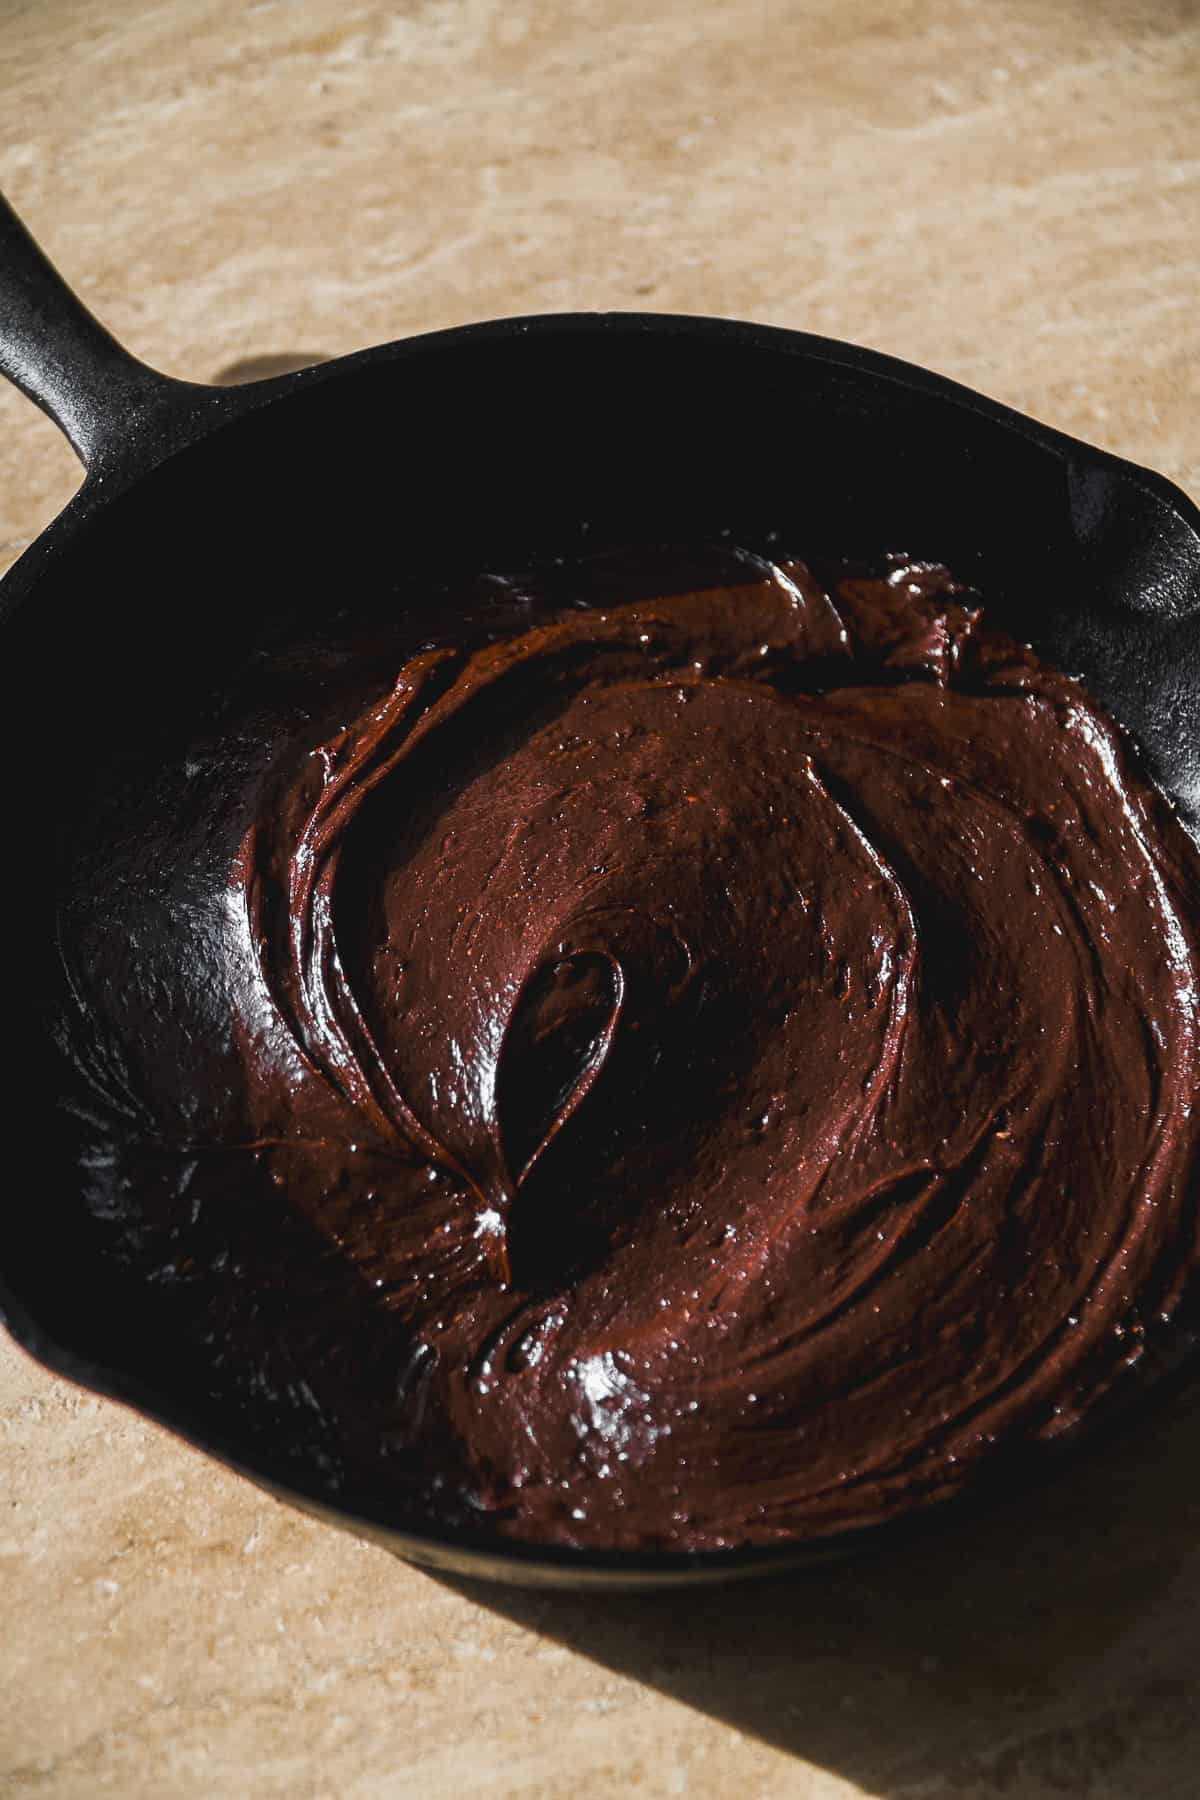 Chocolate flourless cake batter in a skillet.